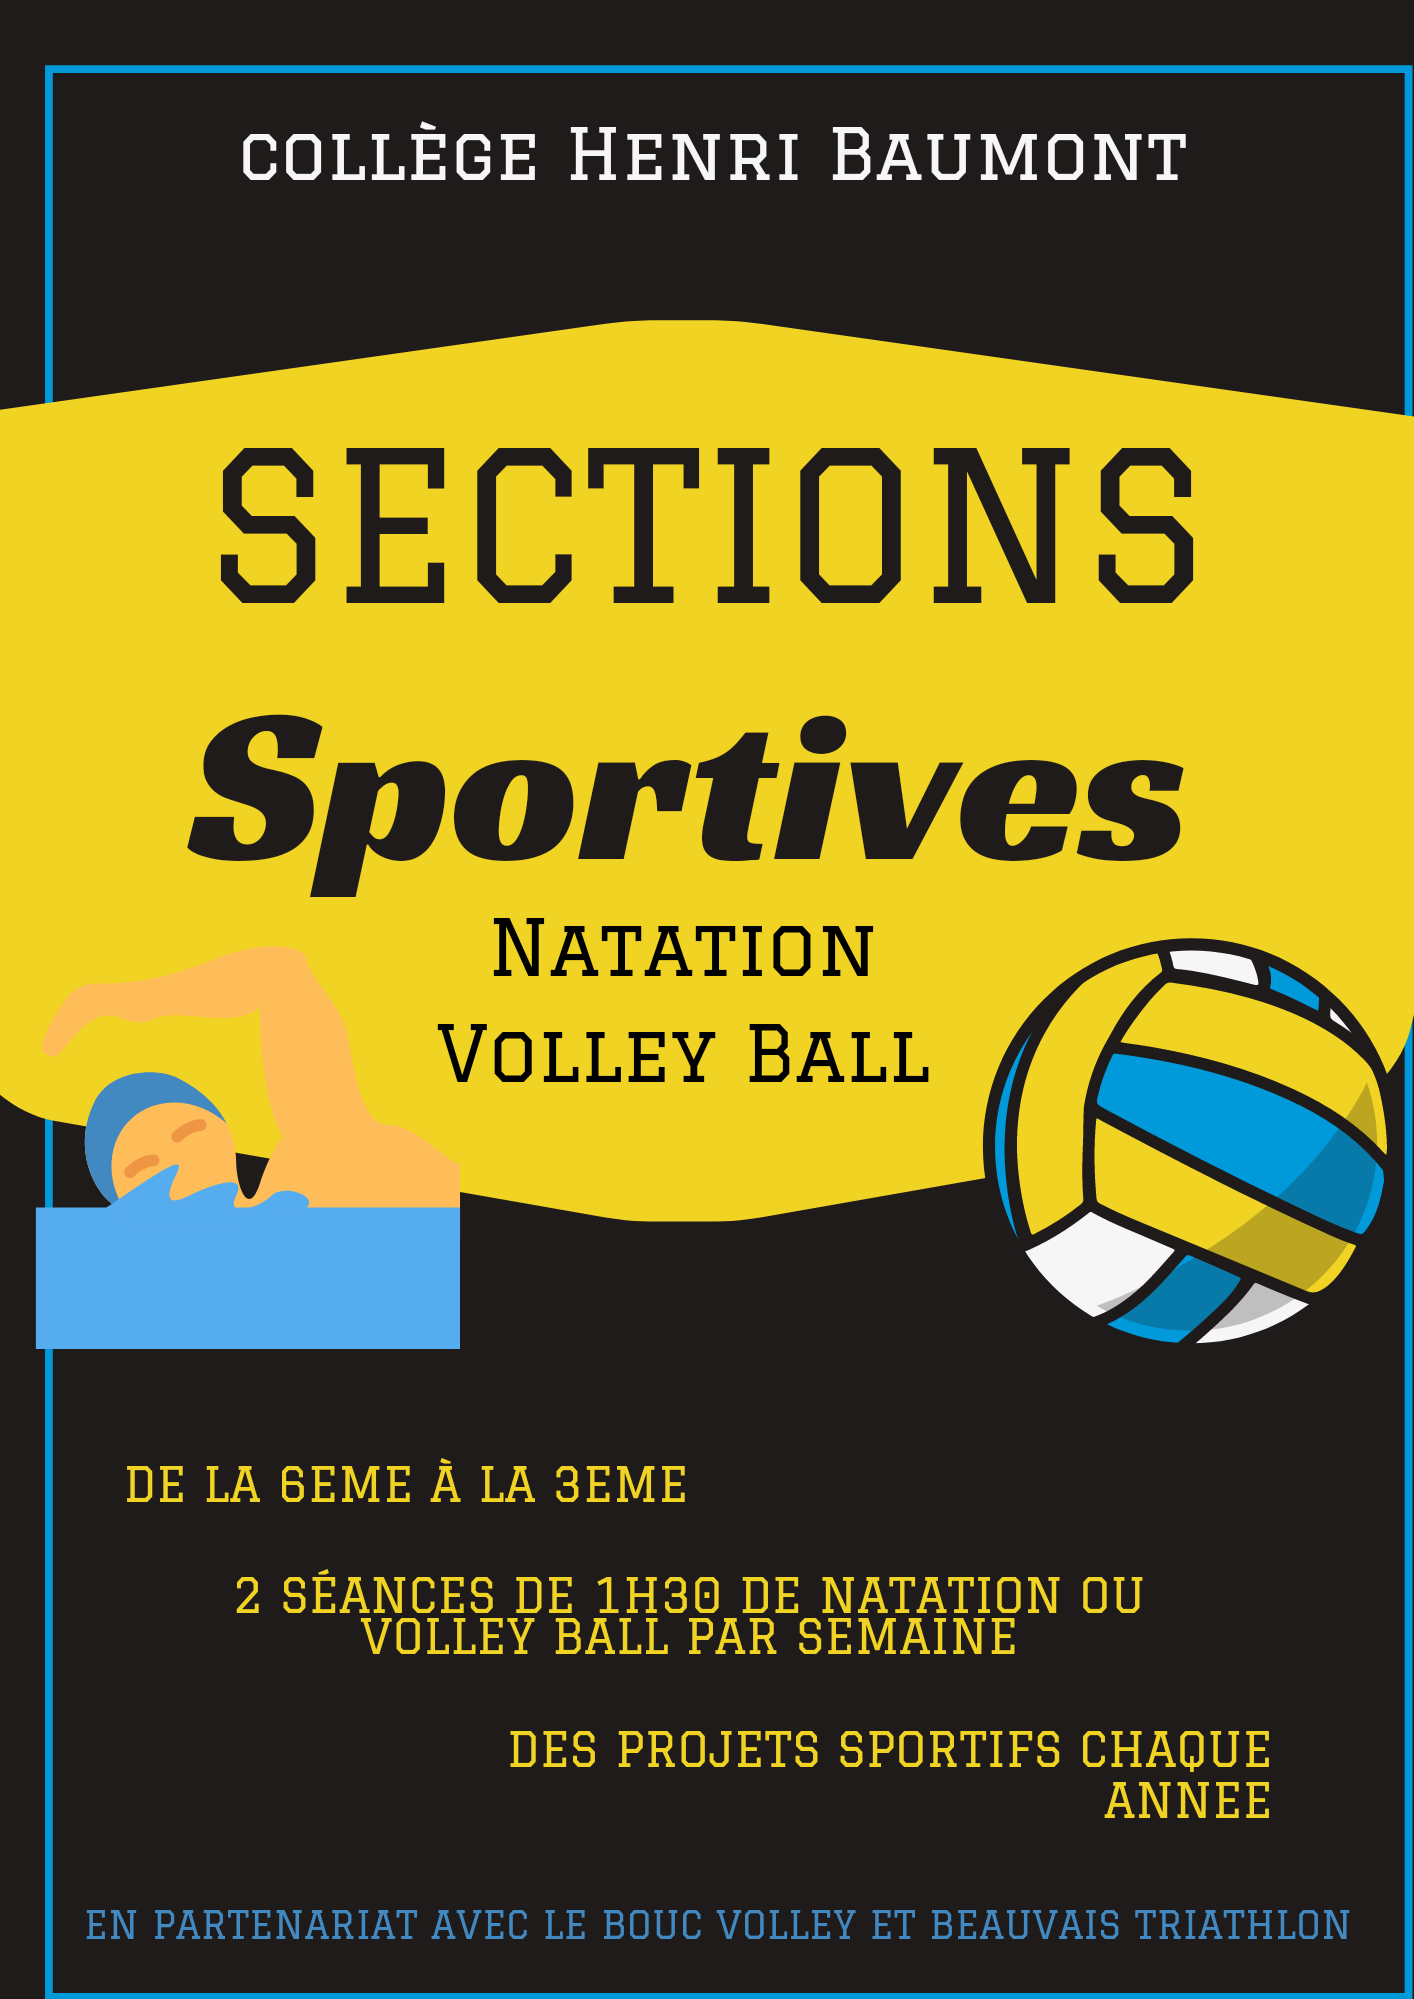 Sections Sportives